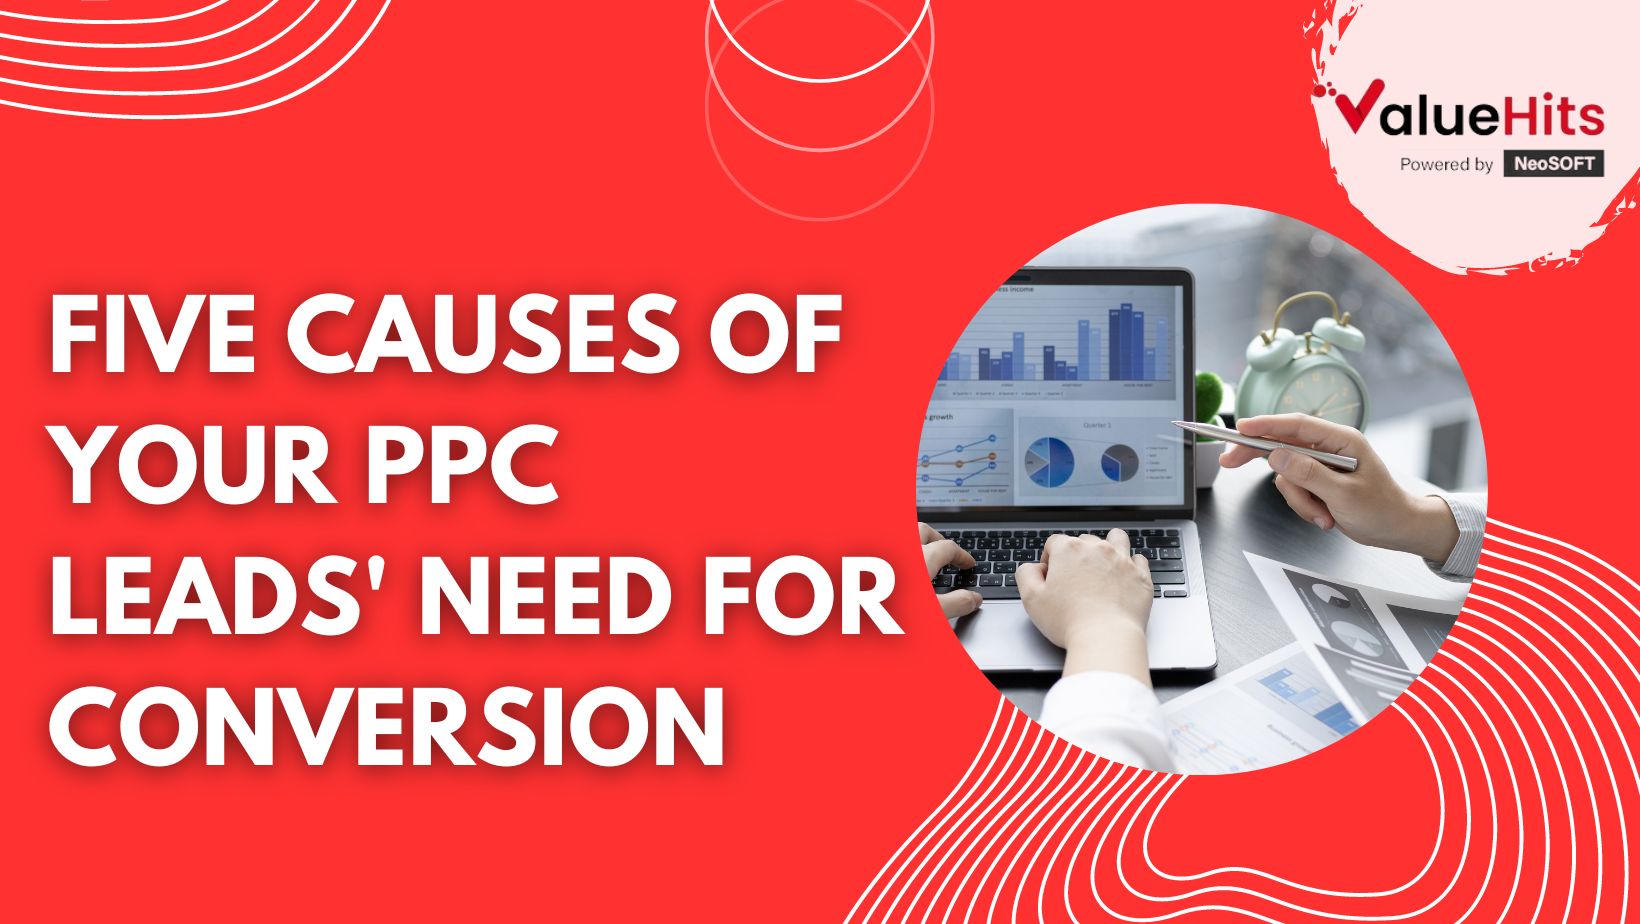 Five causes of your PPC leads' need for conversion